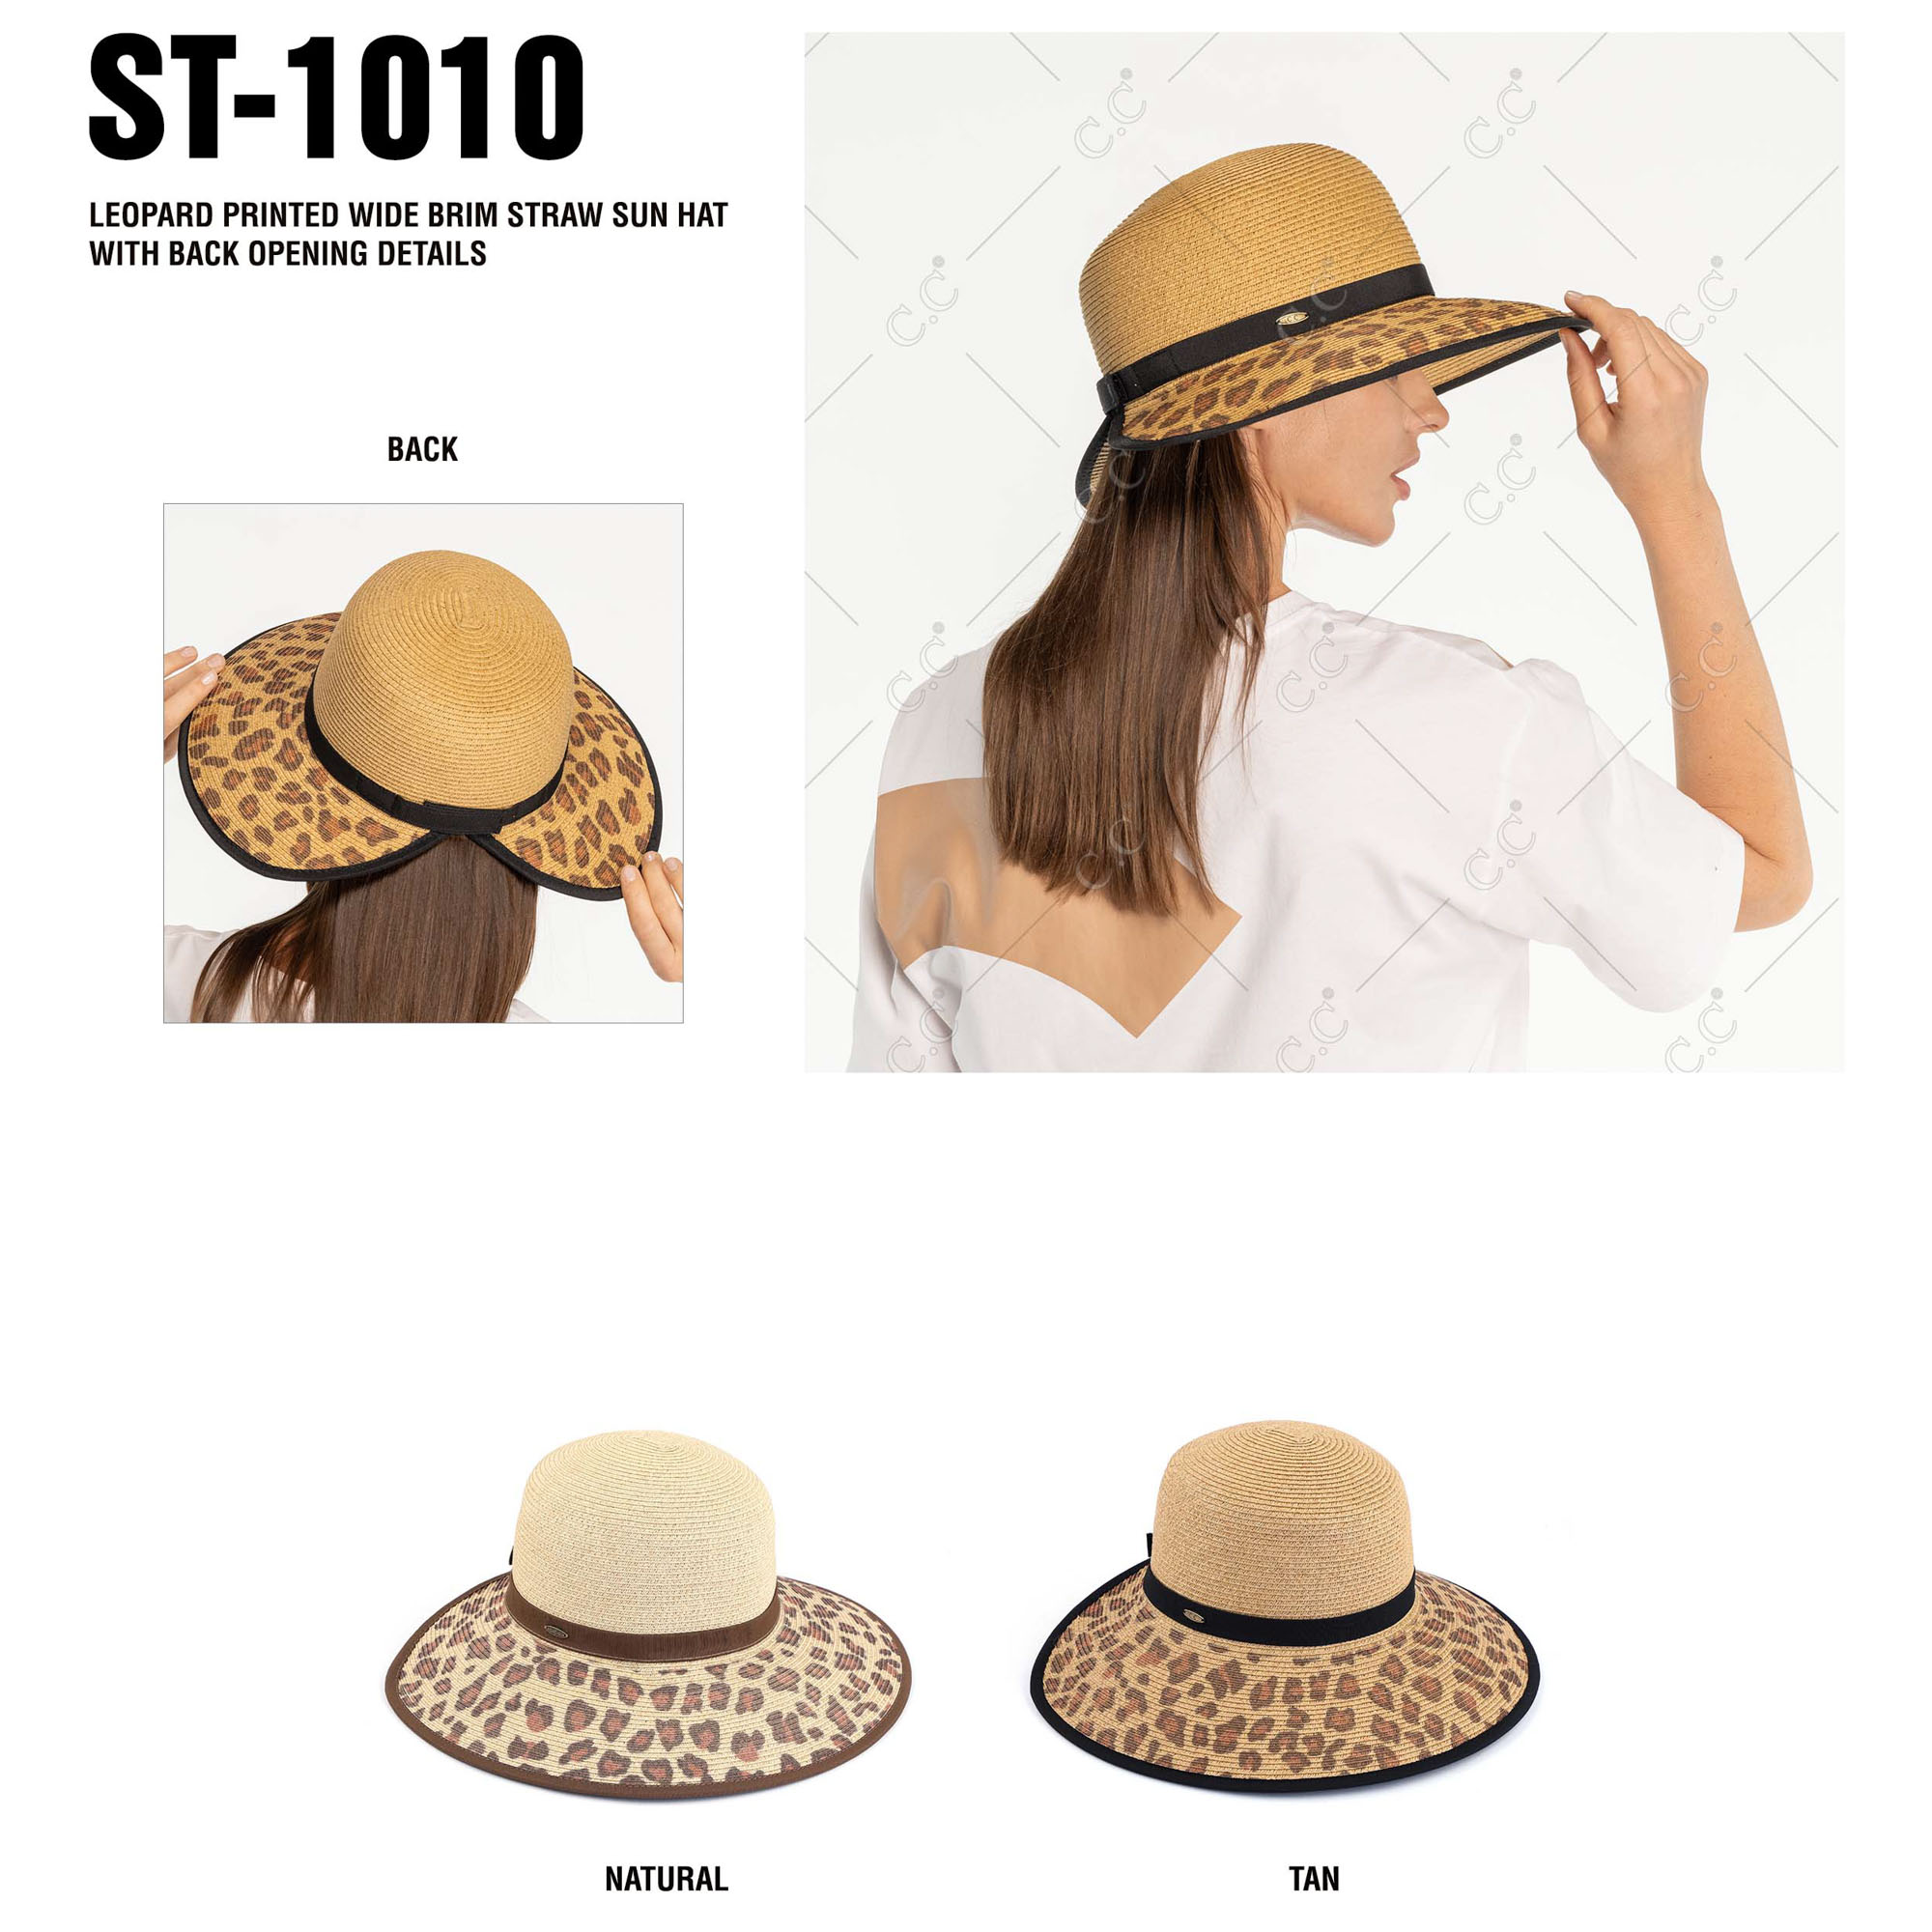 LEOPARD PRINTED WIDE BRIM STRAW SUN HAT WITH BACK OPENING DETAILS